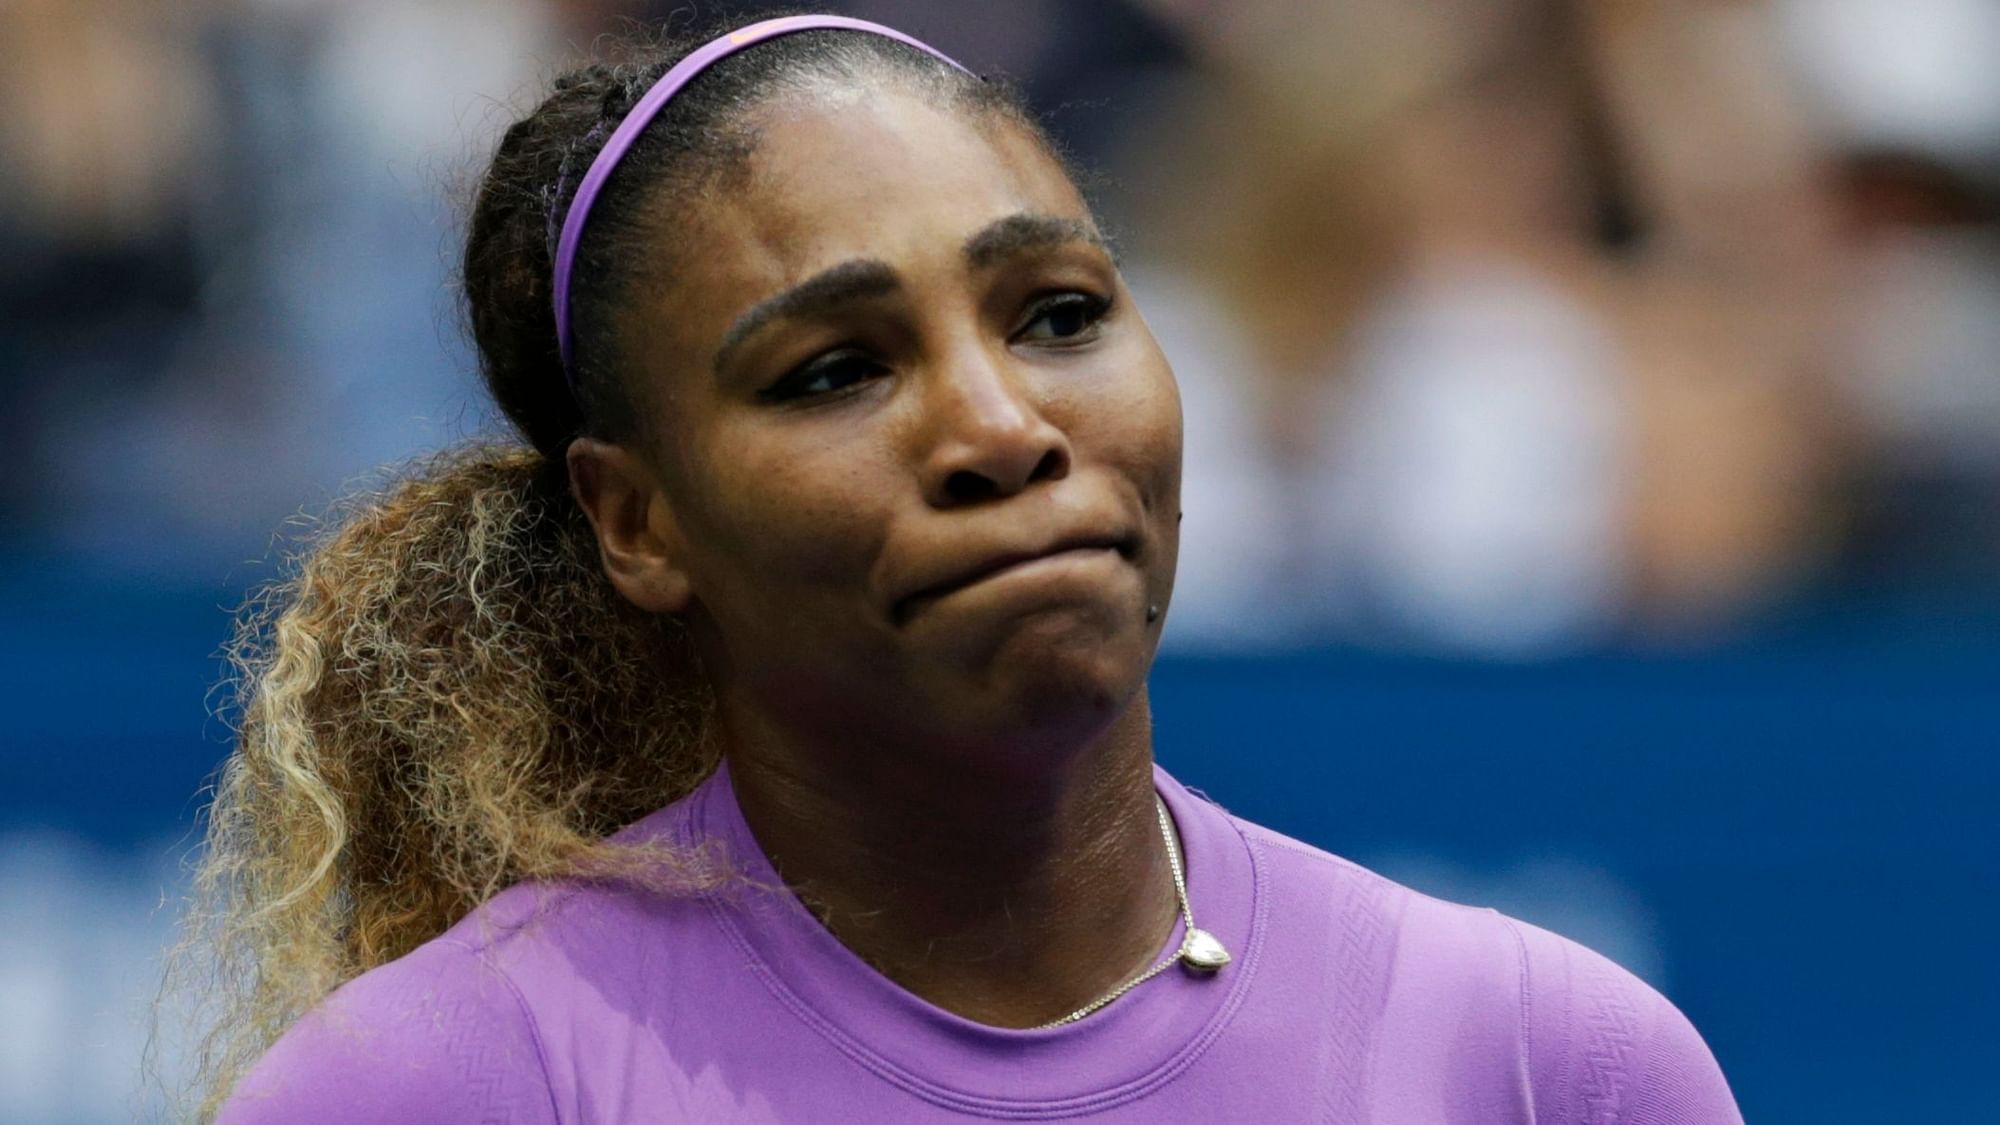 Serena Williams voiced concern over pollution from bushfire smoke at the Australian Open on Monday, 20 January saying that lung problems in the past could make her more vulnerable.